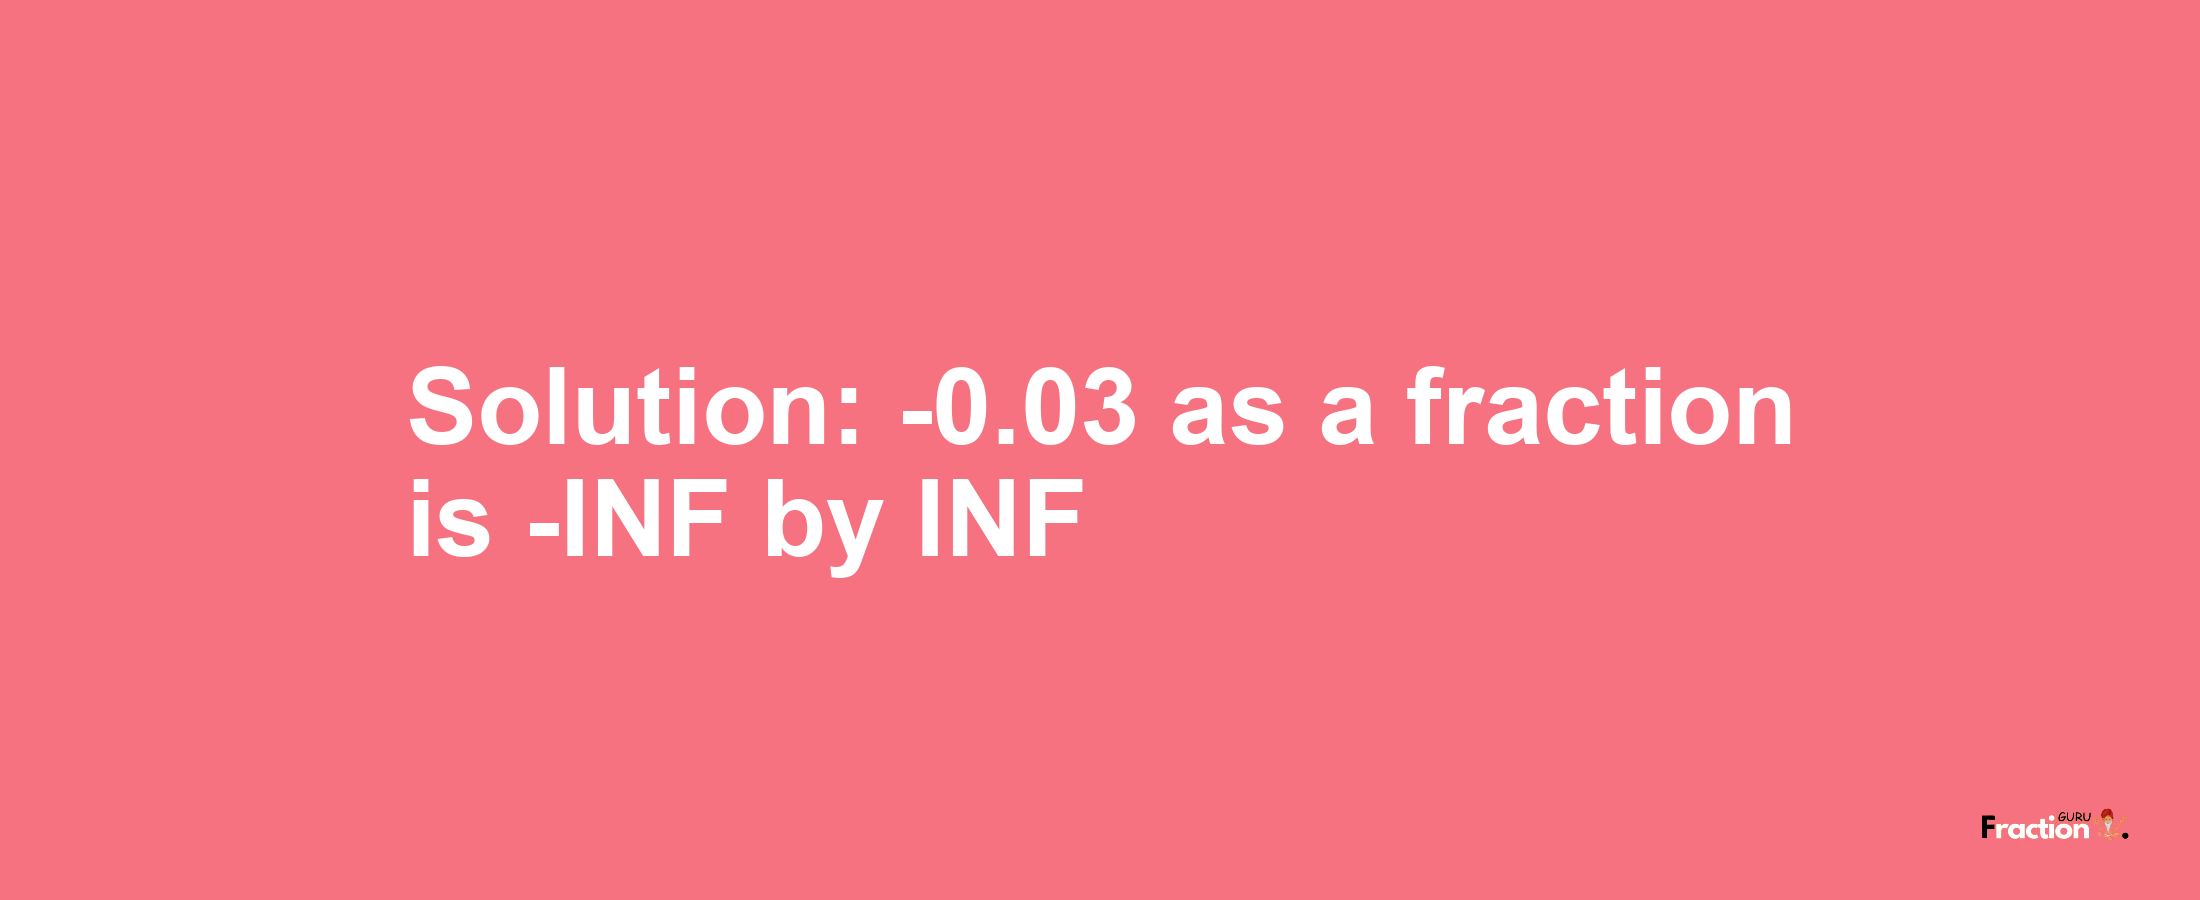 Solution:-0.03 as a fraction is -INF/INF